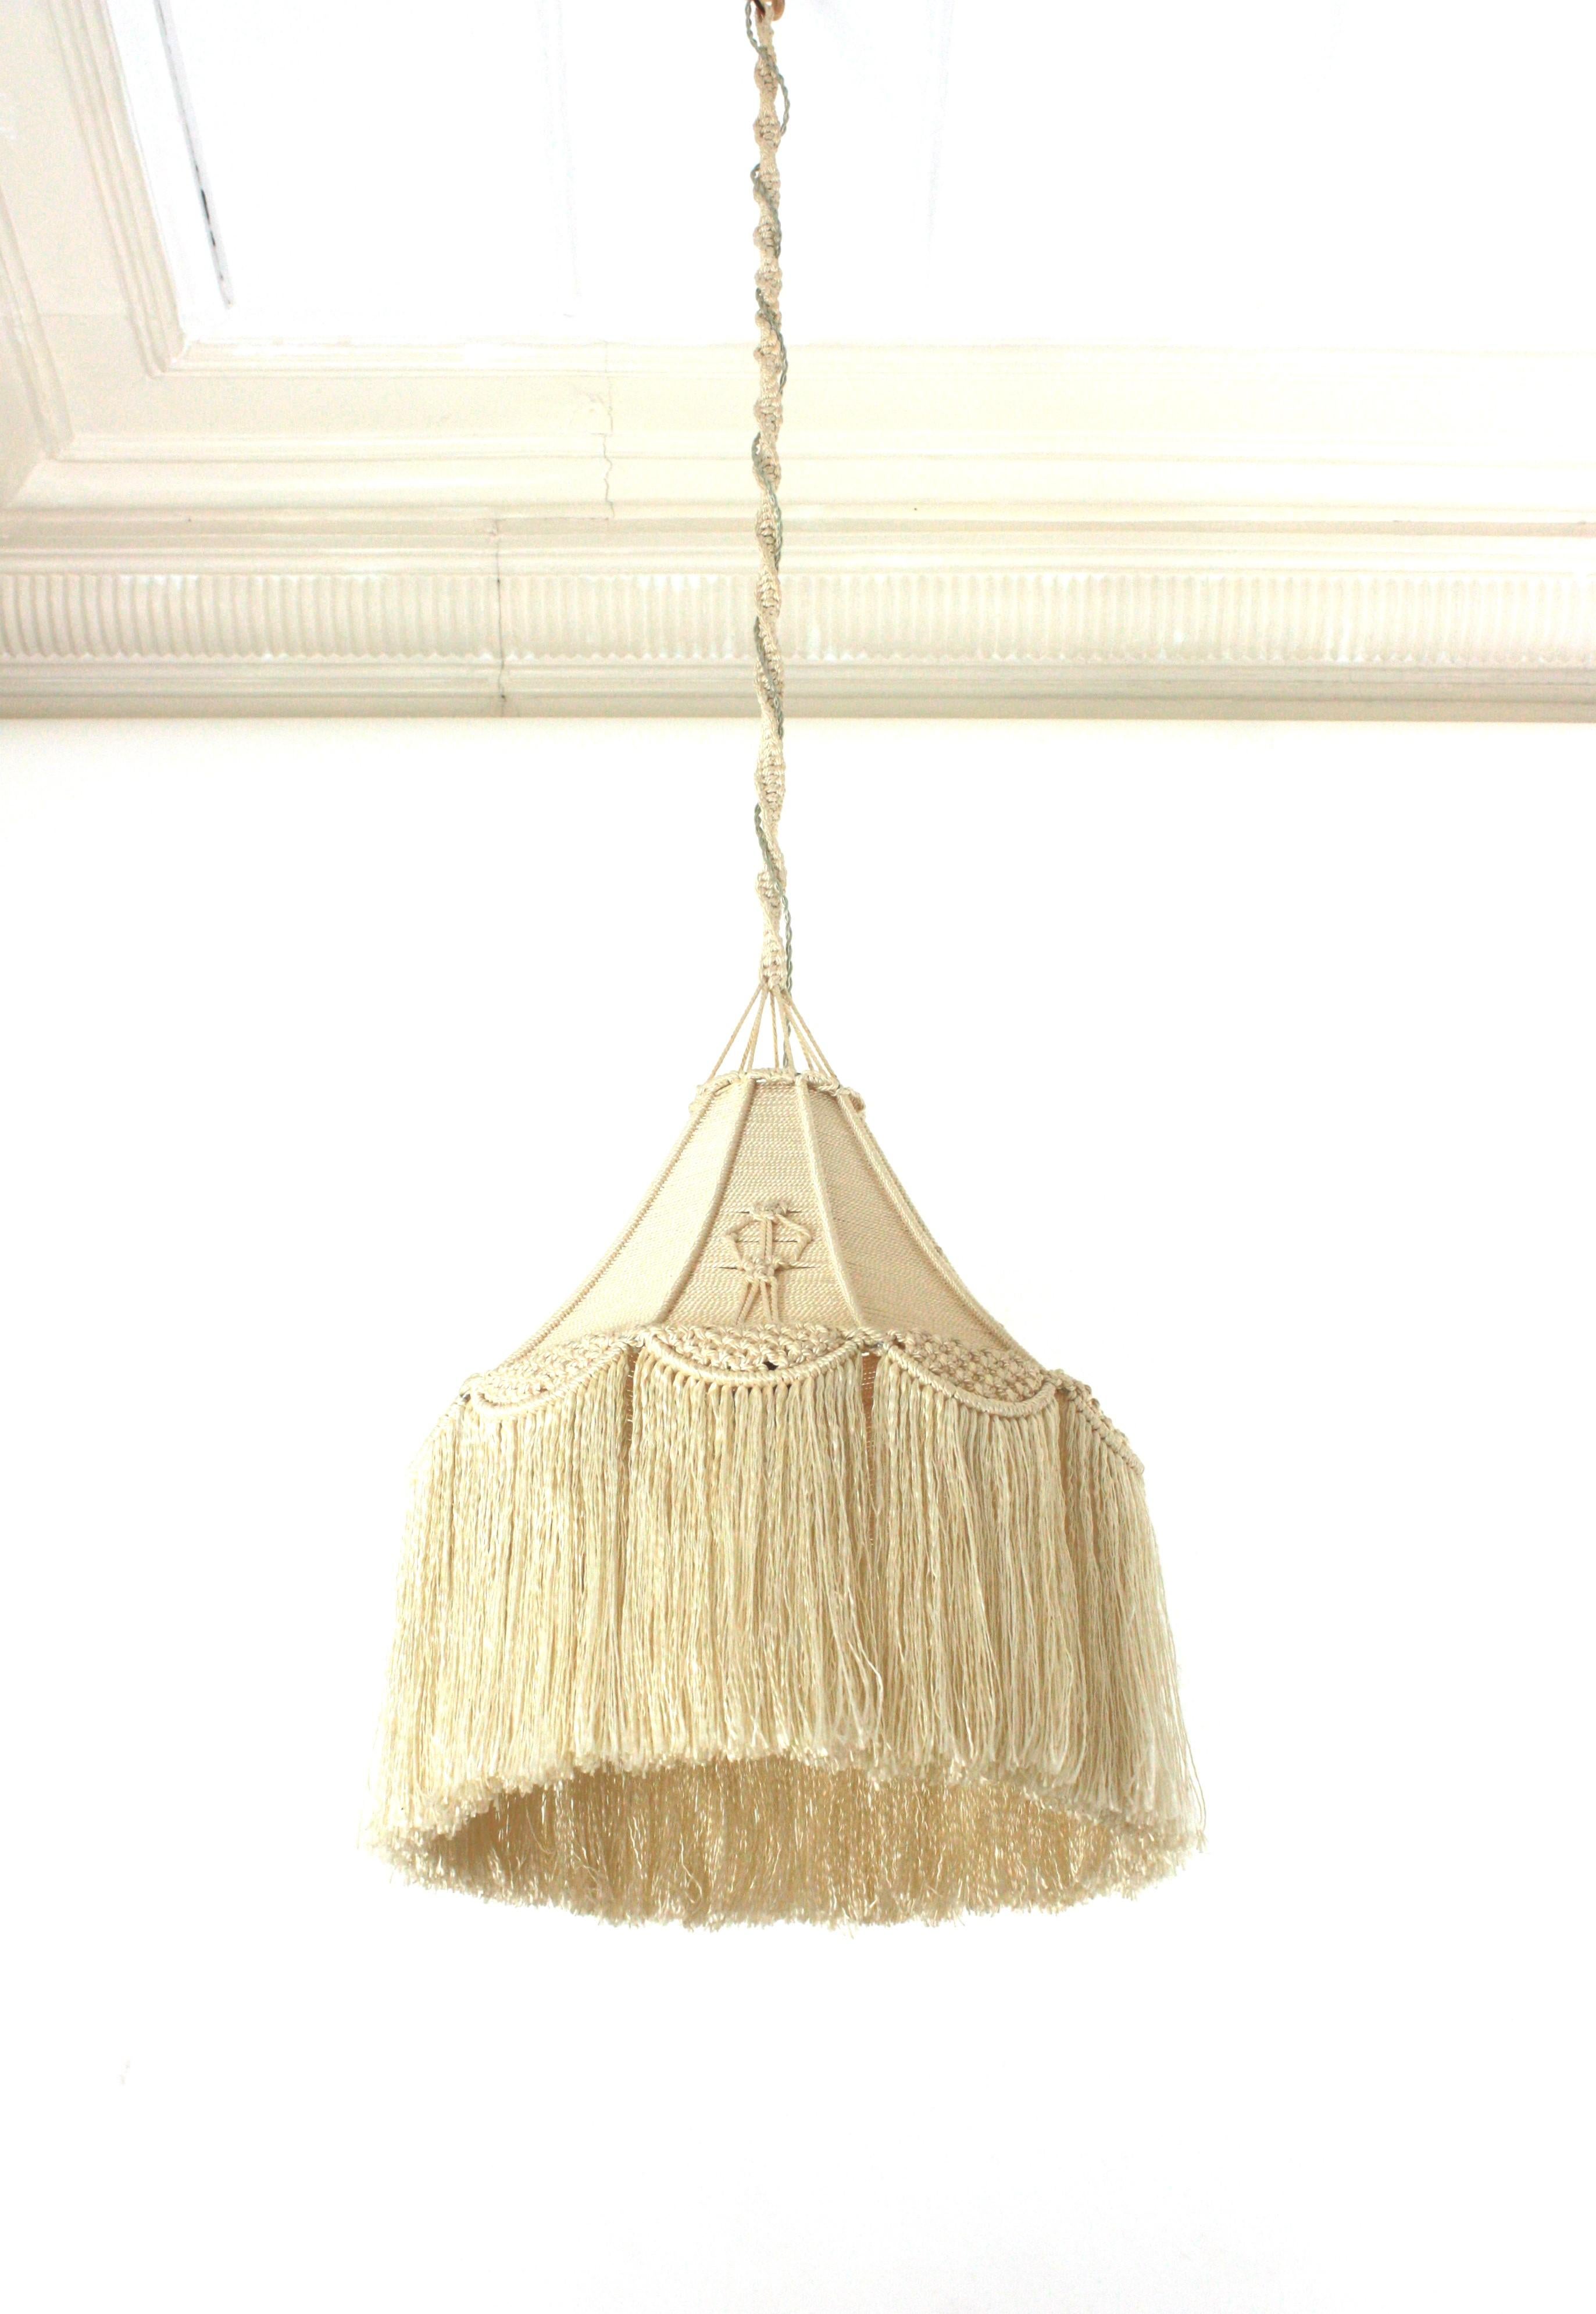 Bohemian Macrame Fiber Pendant Ceiling Hanging Lamp with Fringe In Good Condition For Sale In Barcelona, ES